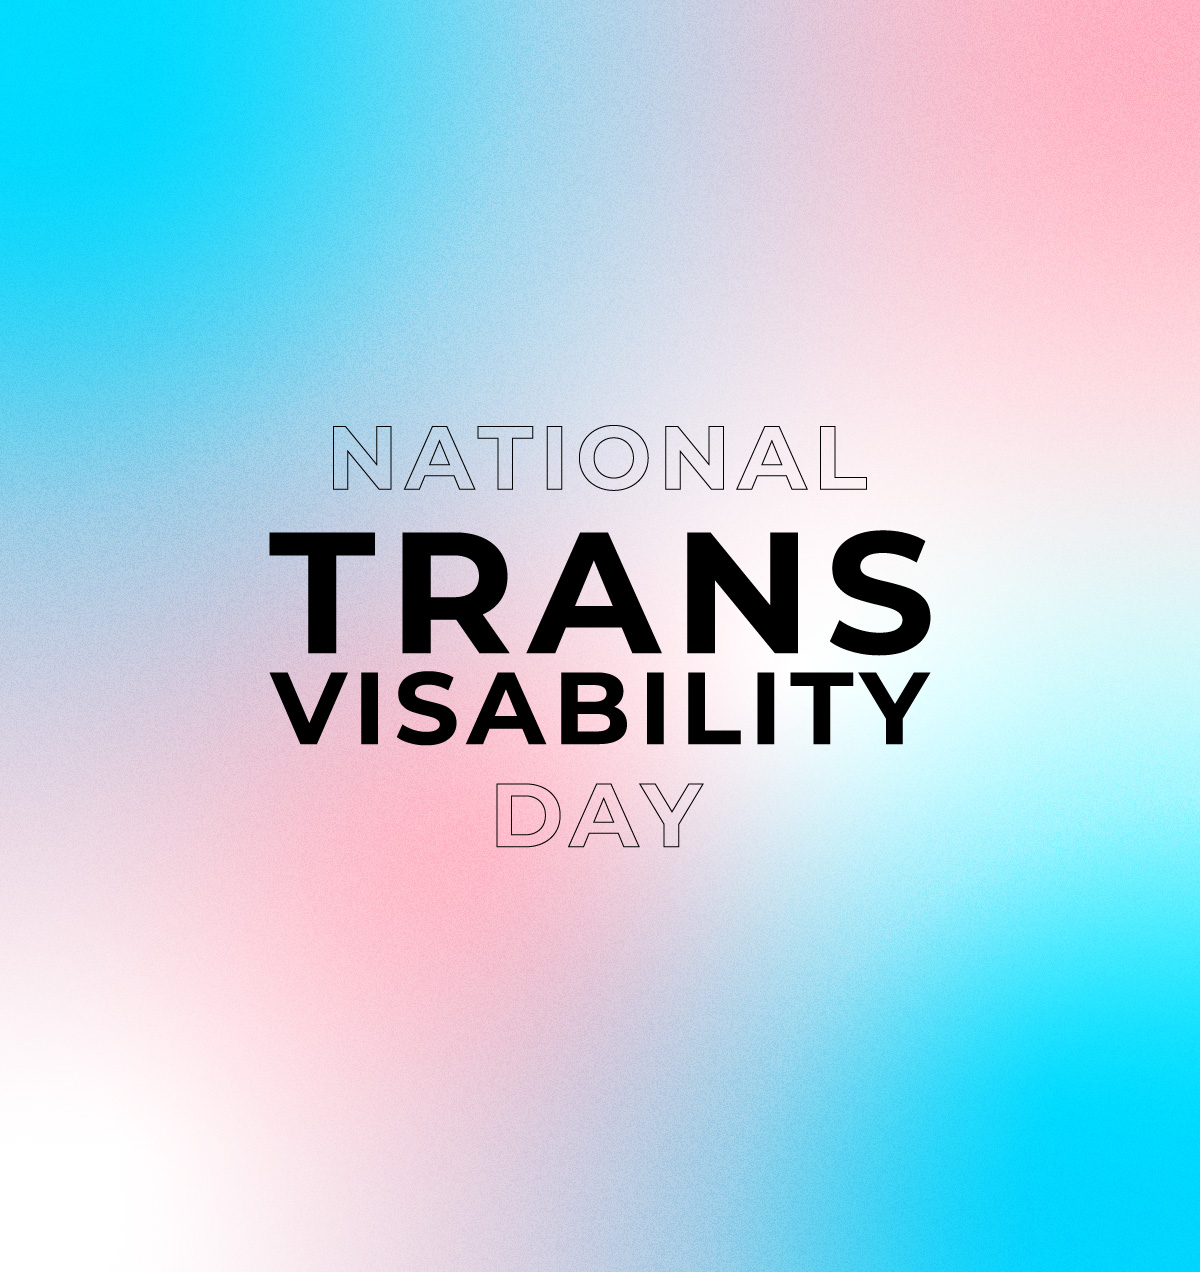 National Trans Visibility Day